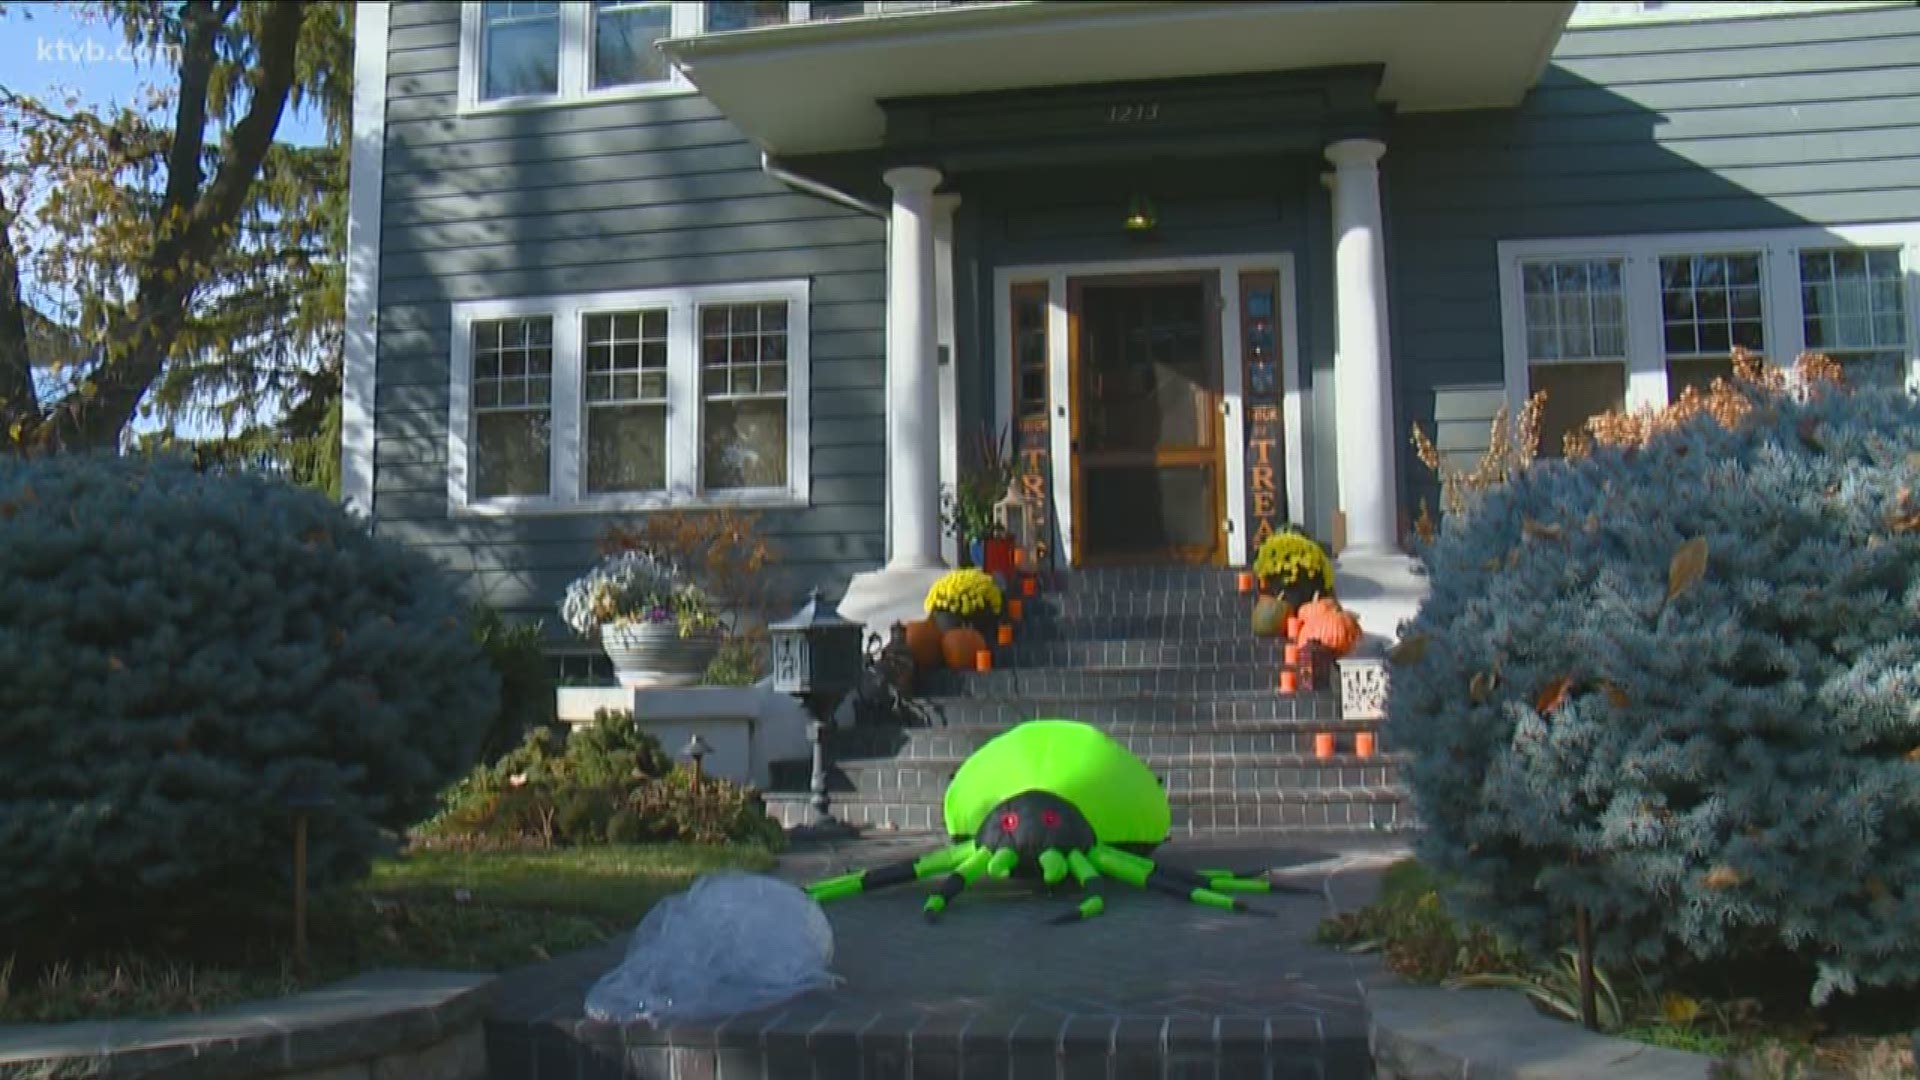 Homeowner Marybeth Flachbart says this year it's going to be the "disco house."